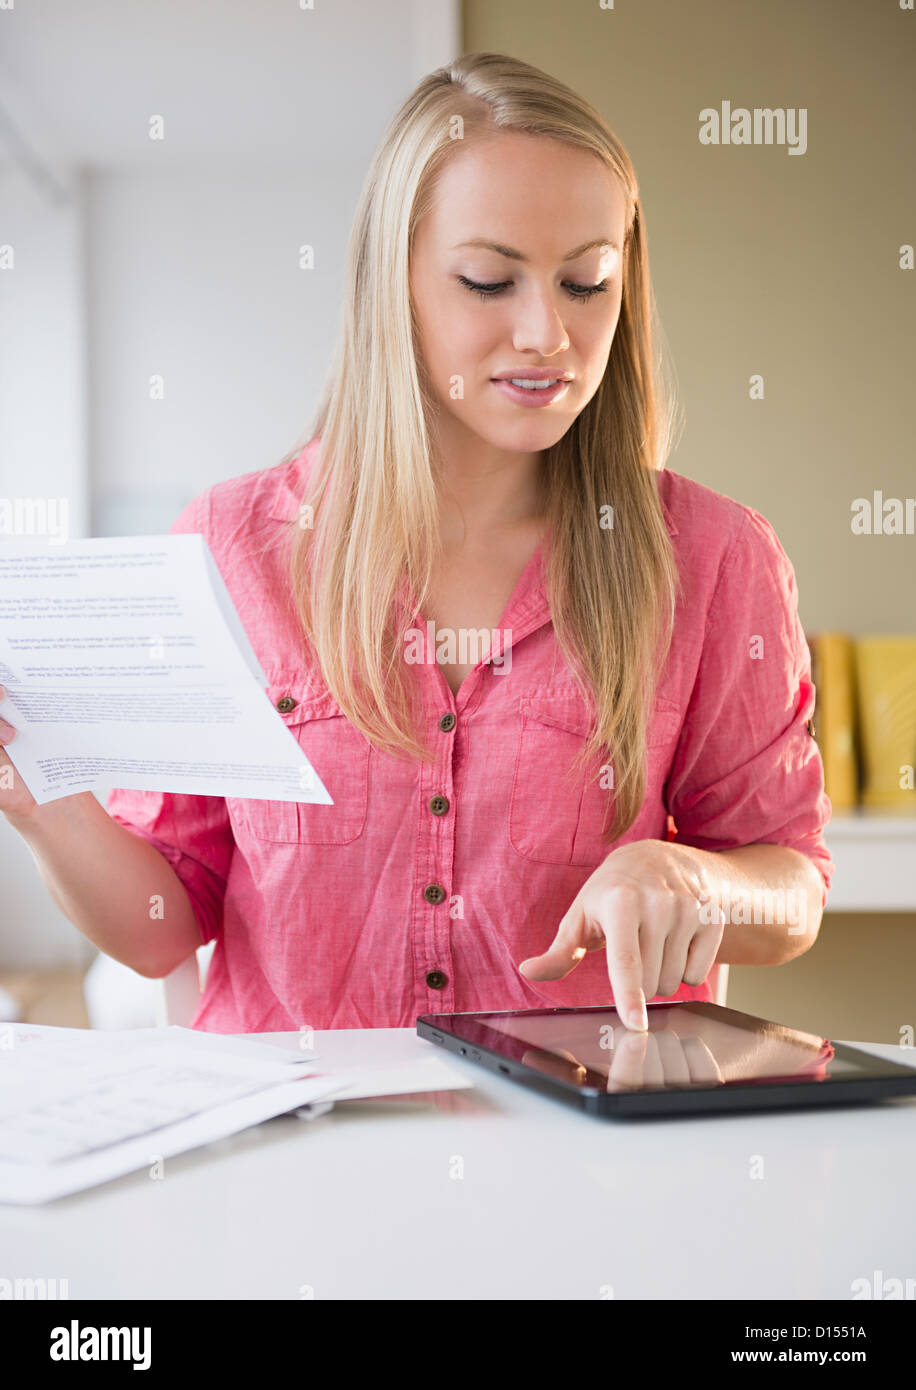 USA, New Jersey, Jersey City, young woman using digital tablet Banque D'Images